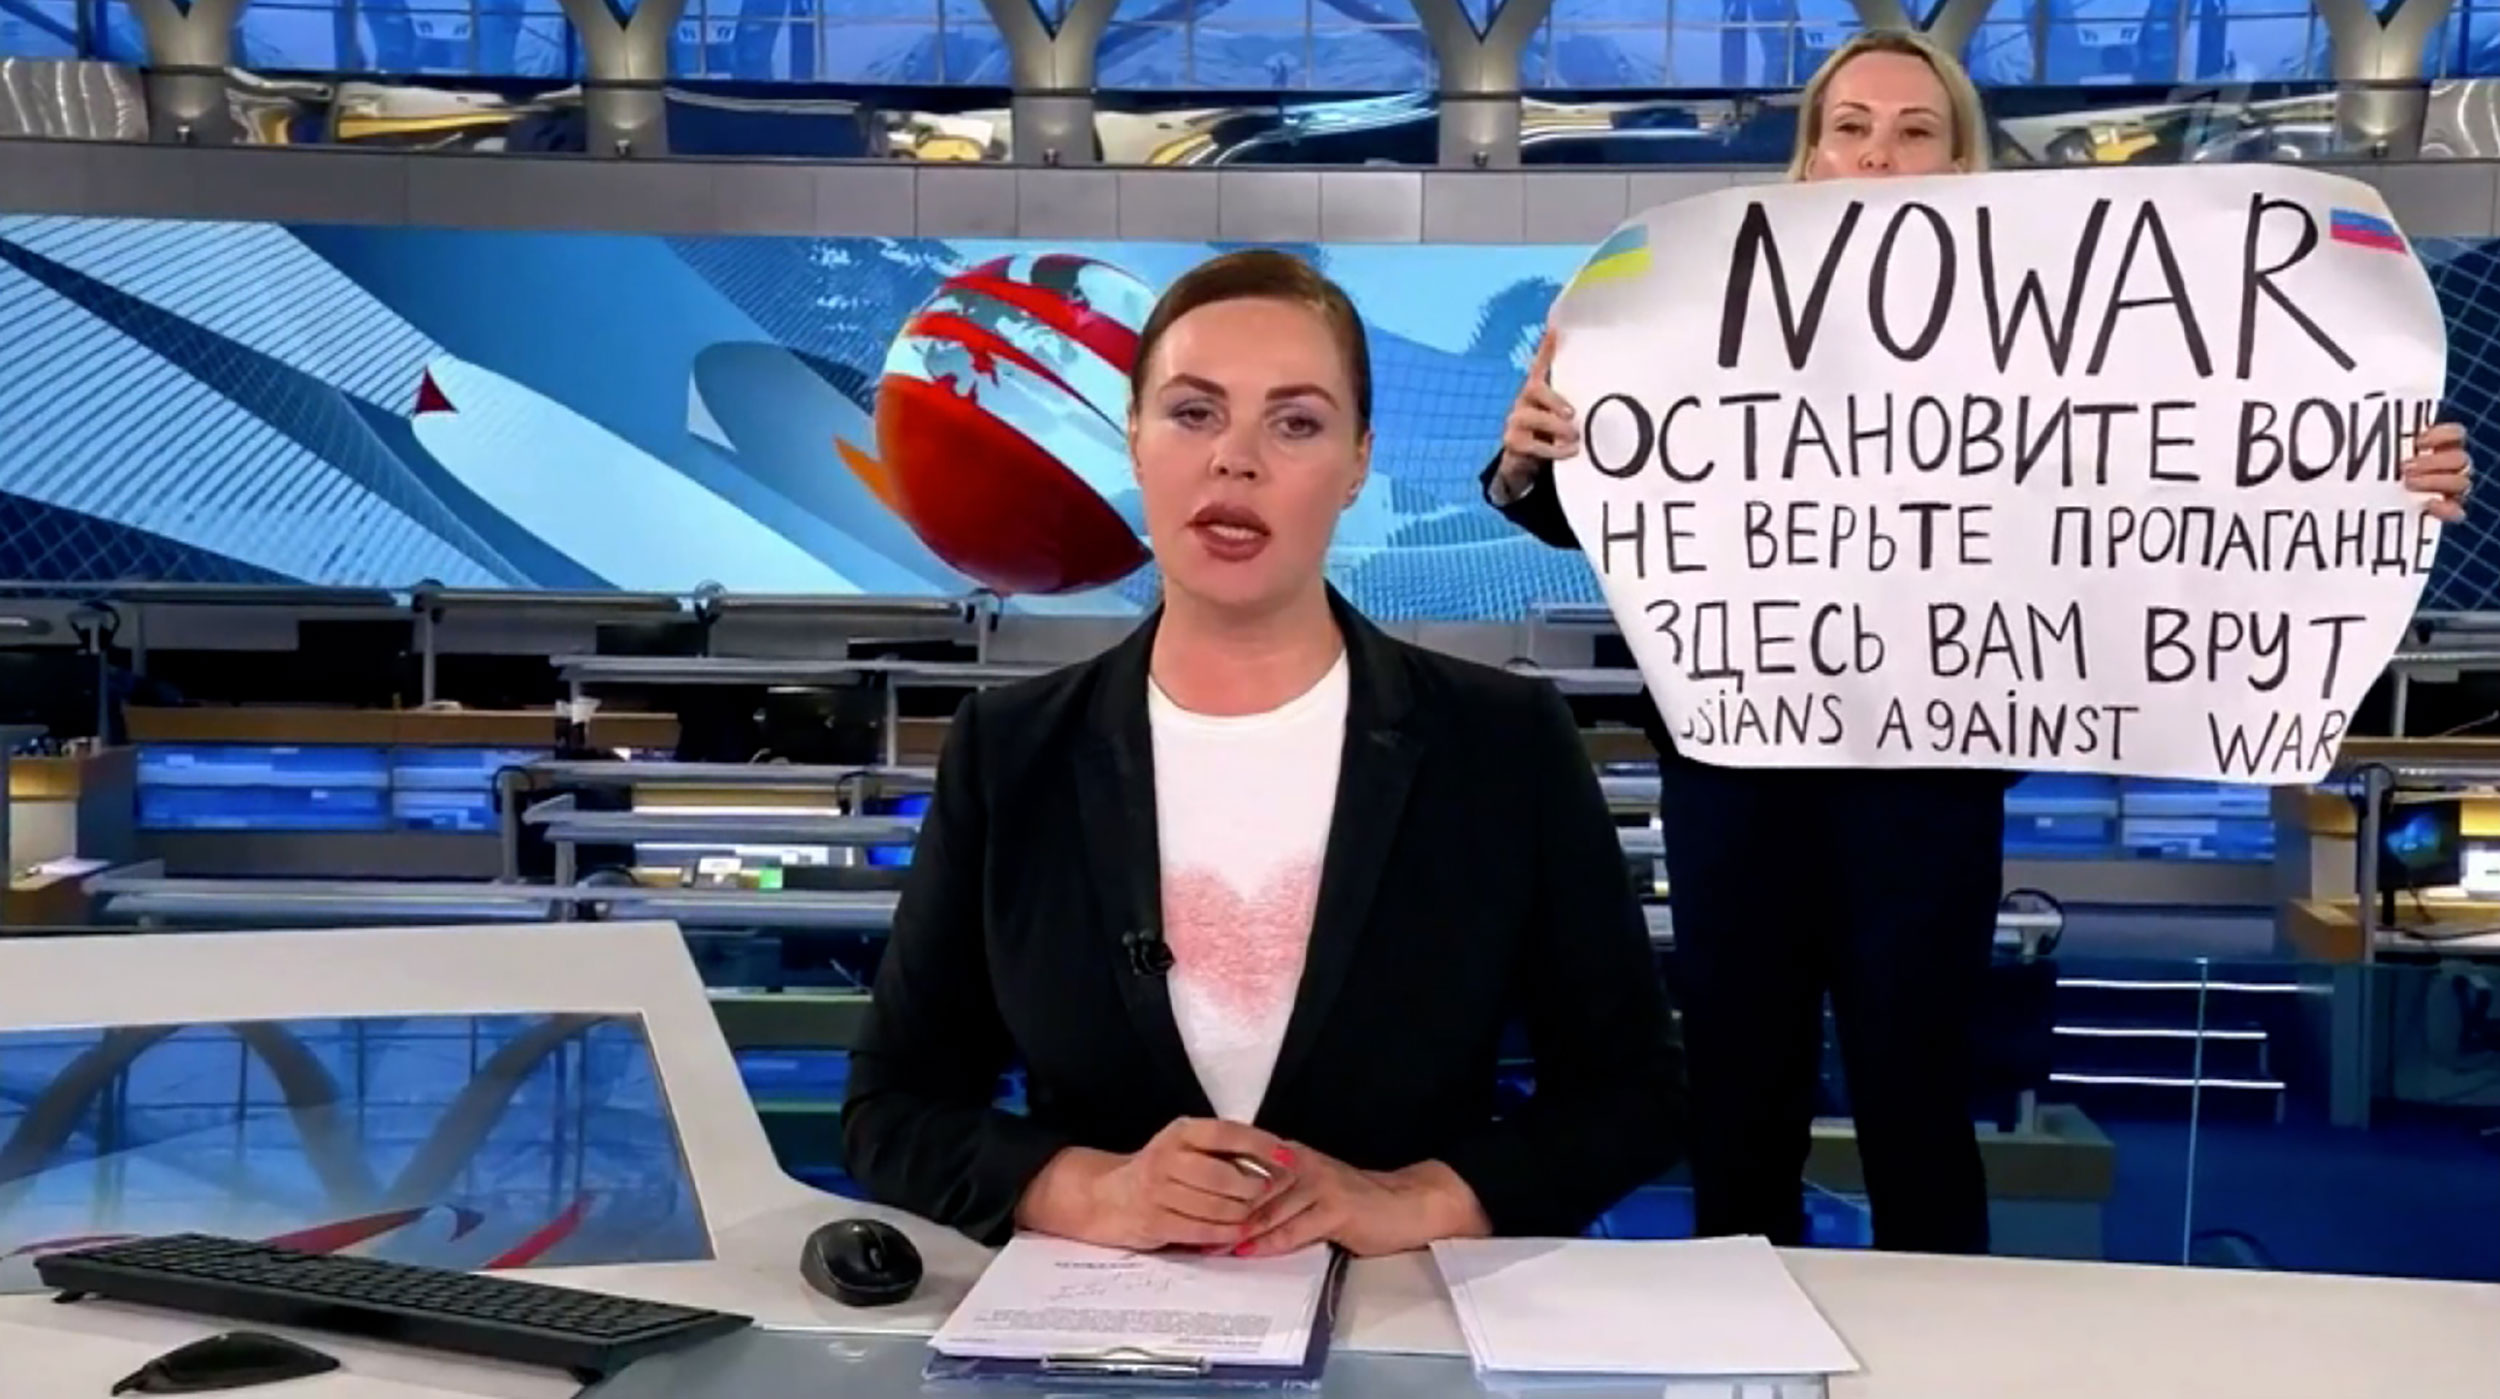 This screen grab shows Channel One editor Marina Ovsyannikova protesting on air on March 14.